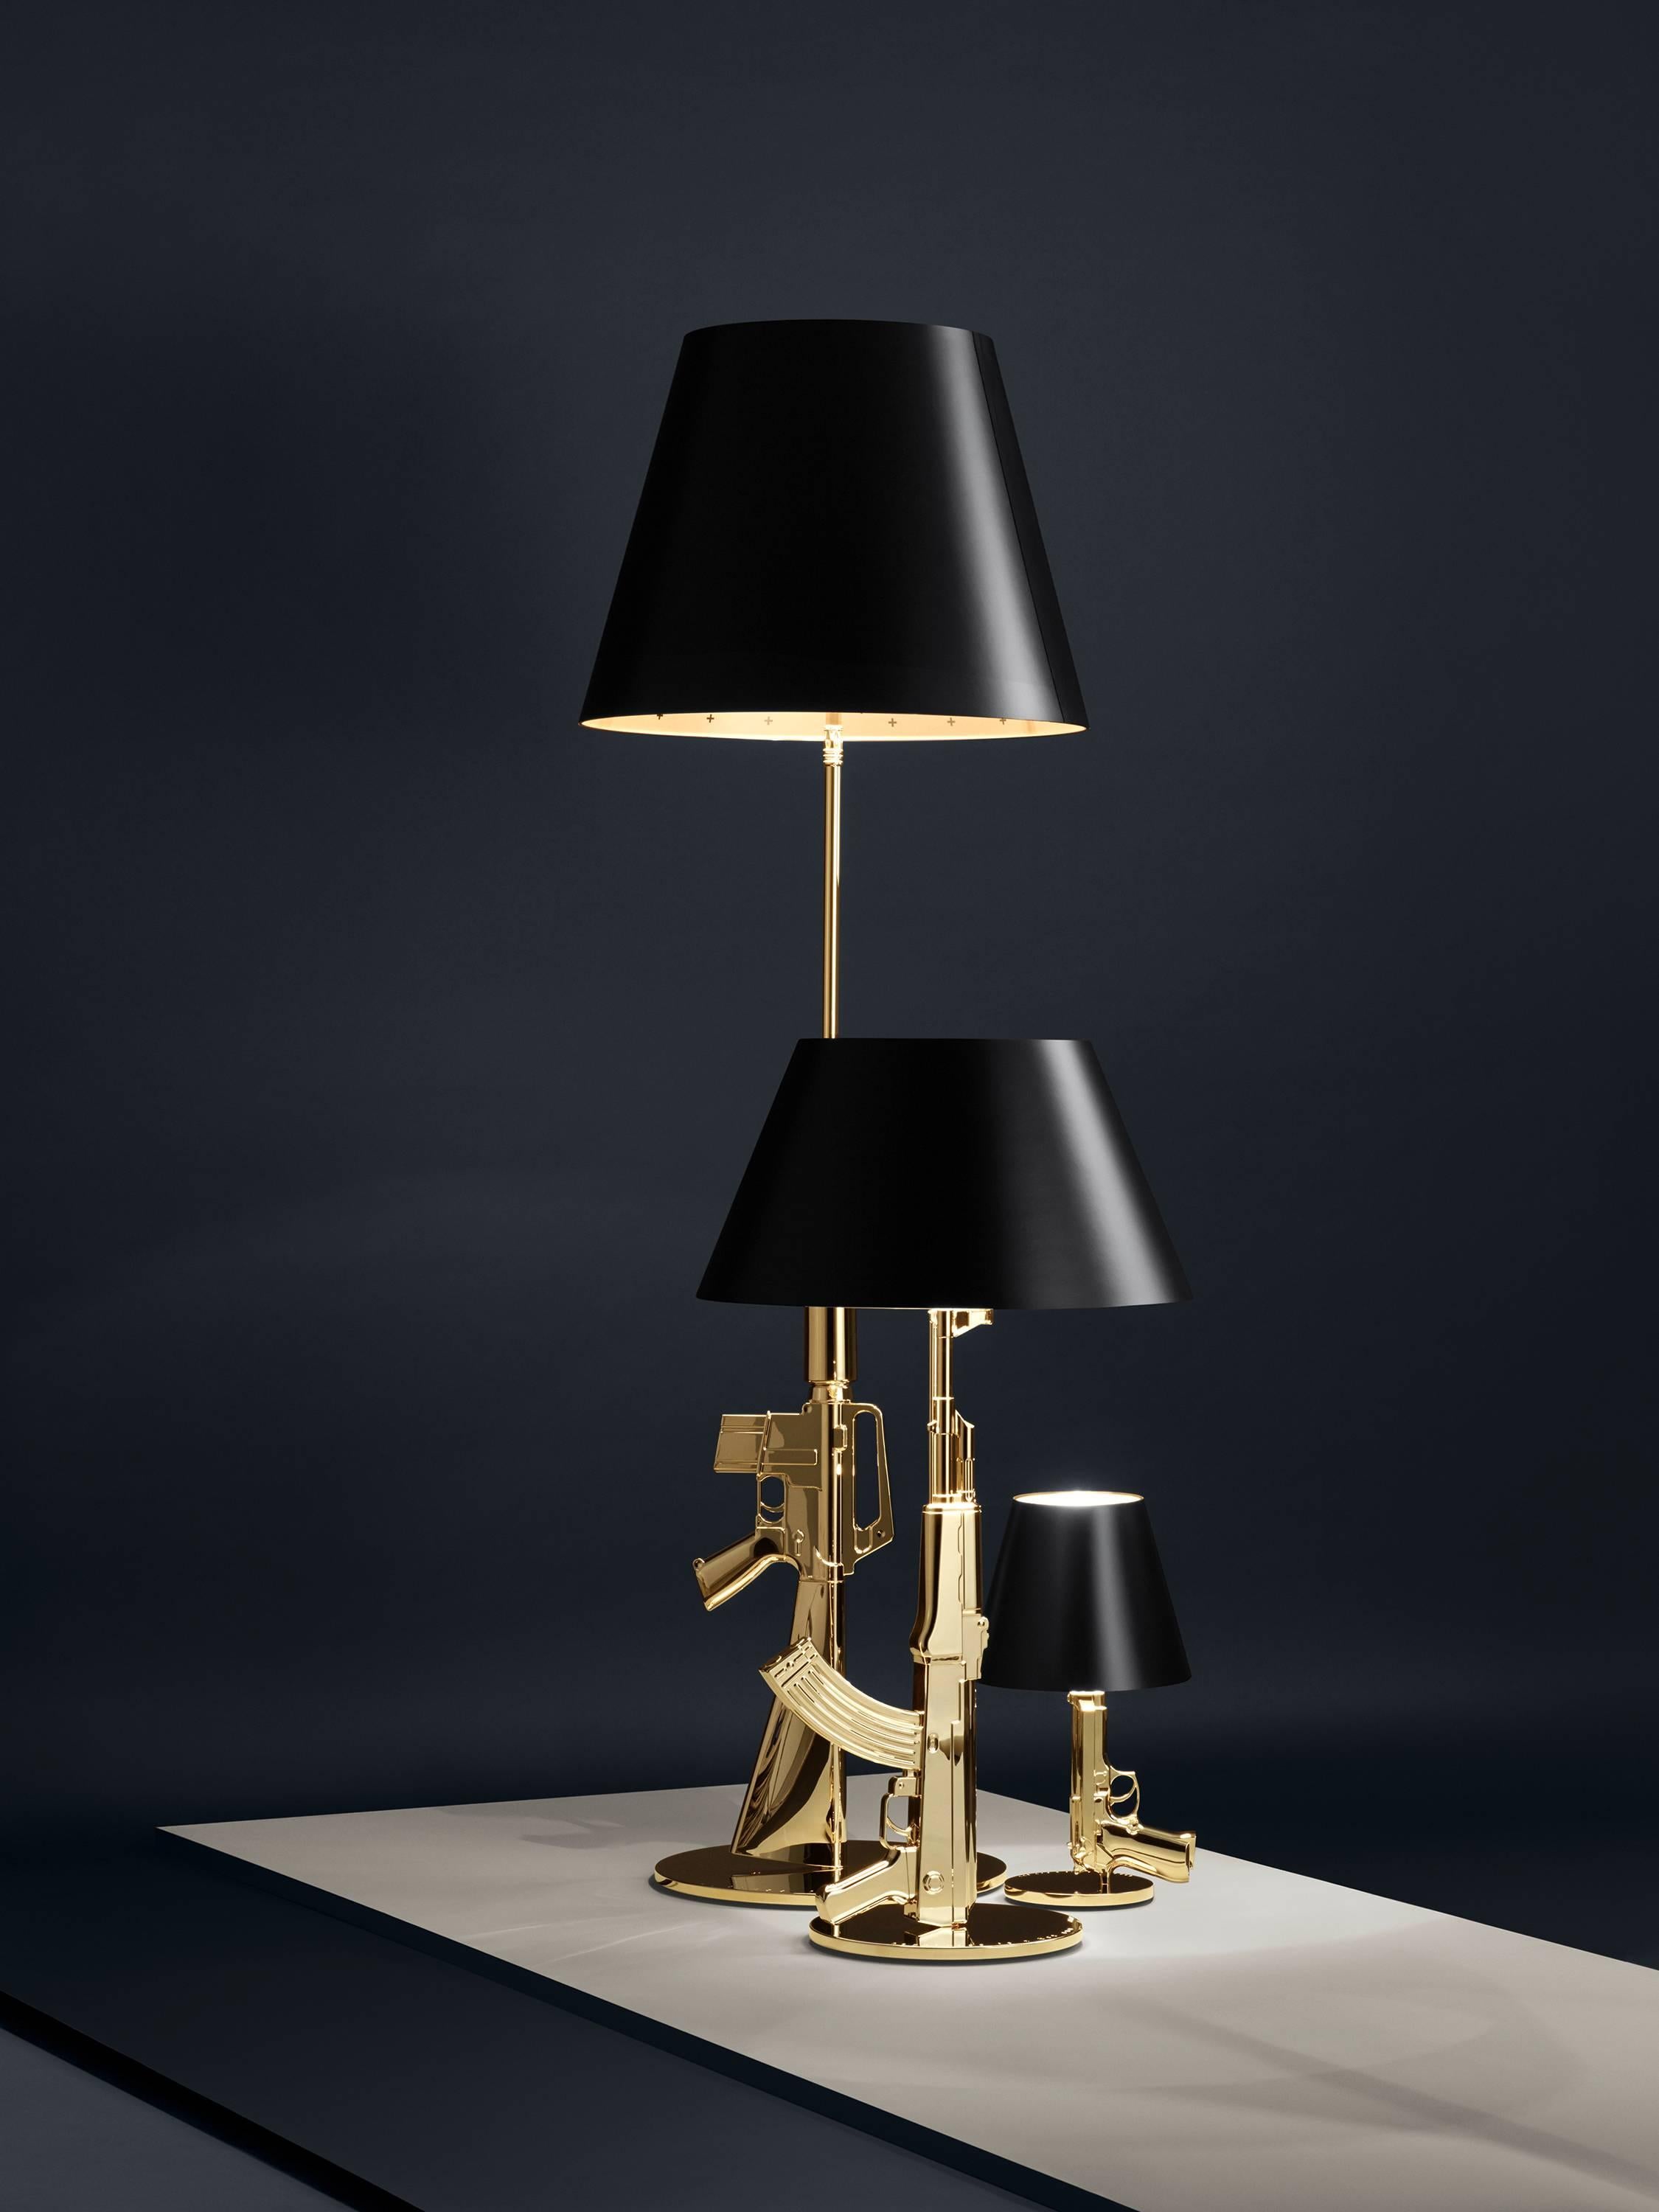 This provocative table lamp is part of the artist’s Guns Collection, making a statement while doing good. “Design is my weapon,” says Philippe Starck, who donates 20% of the collection’s sales to Frères des Hommes, a charitable organization